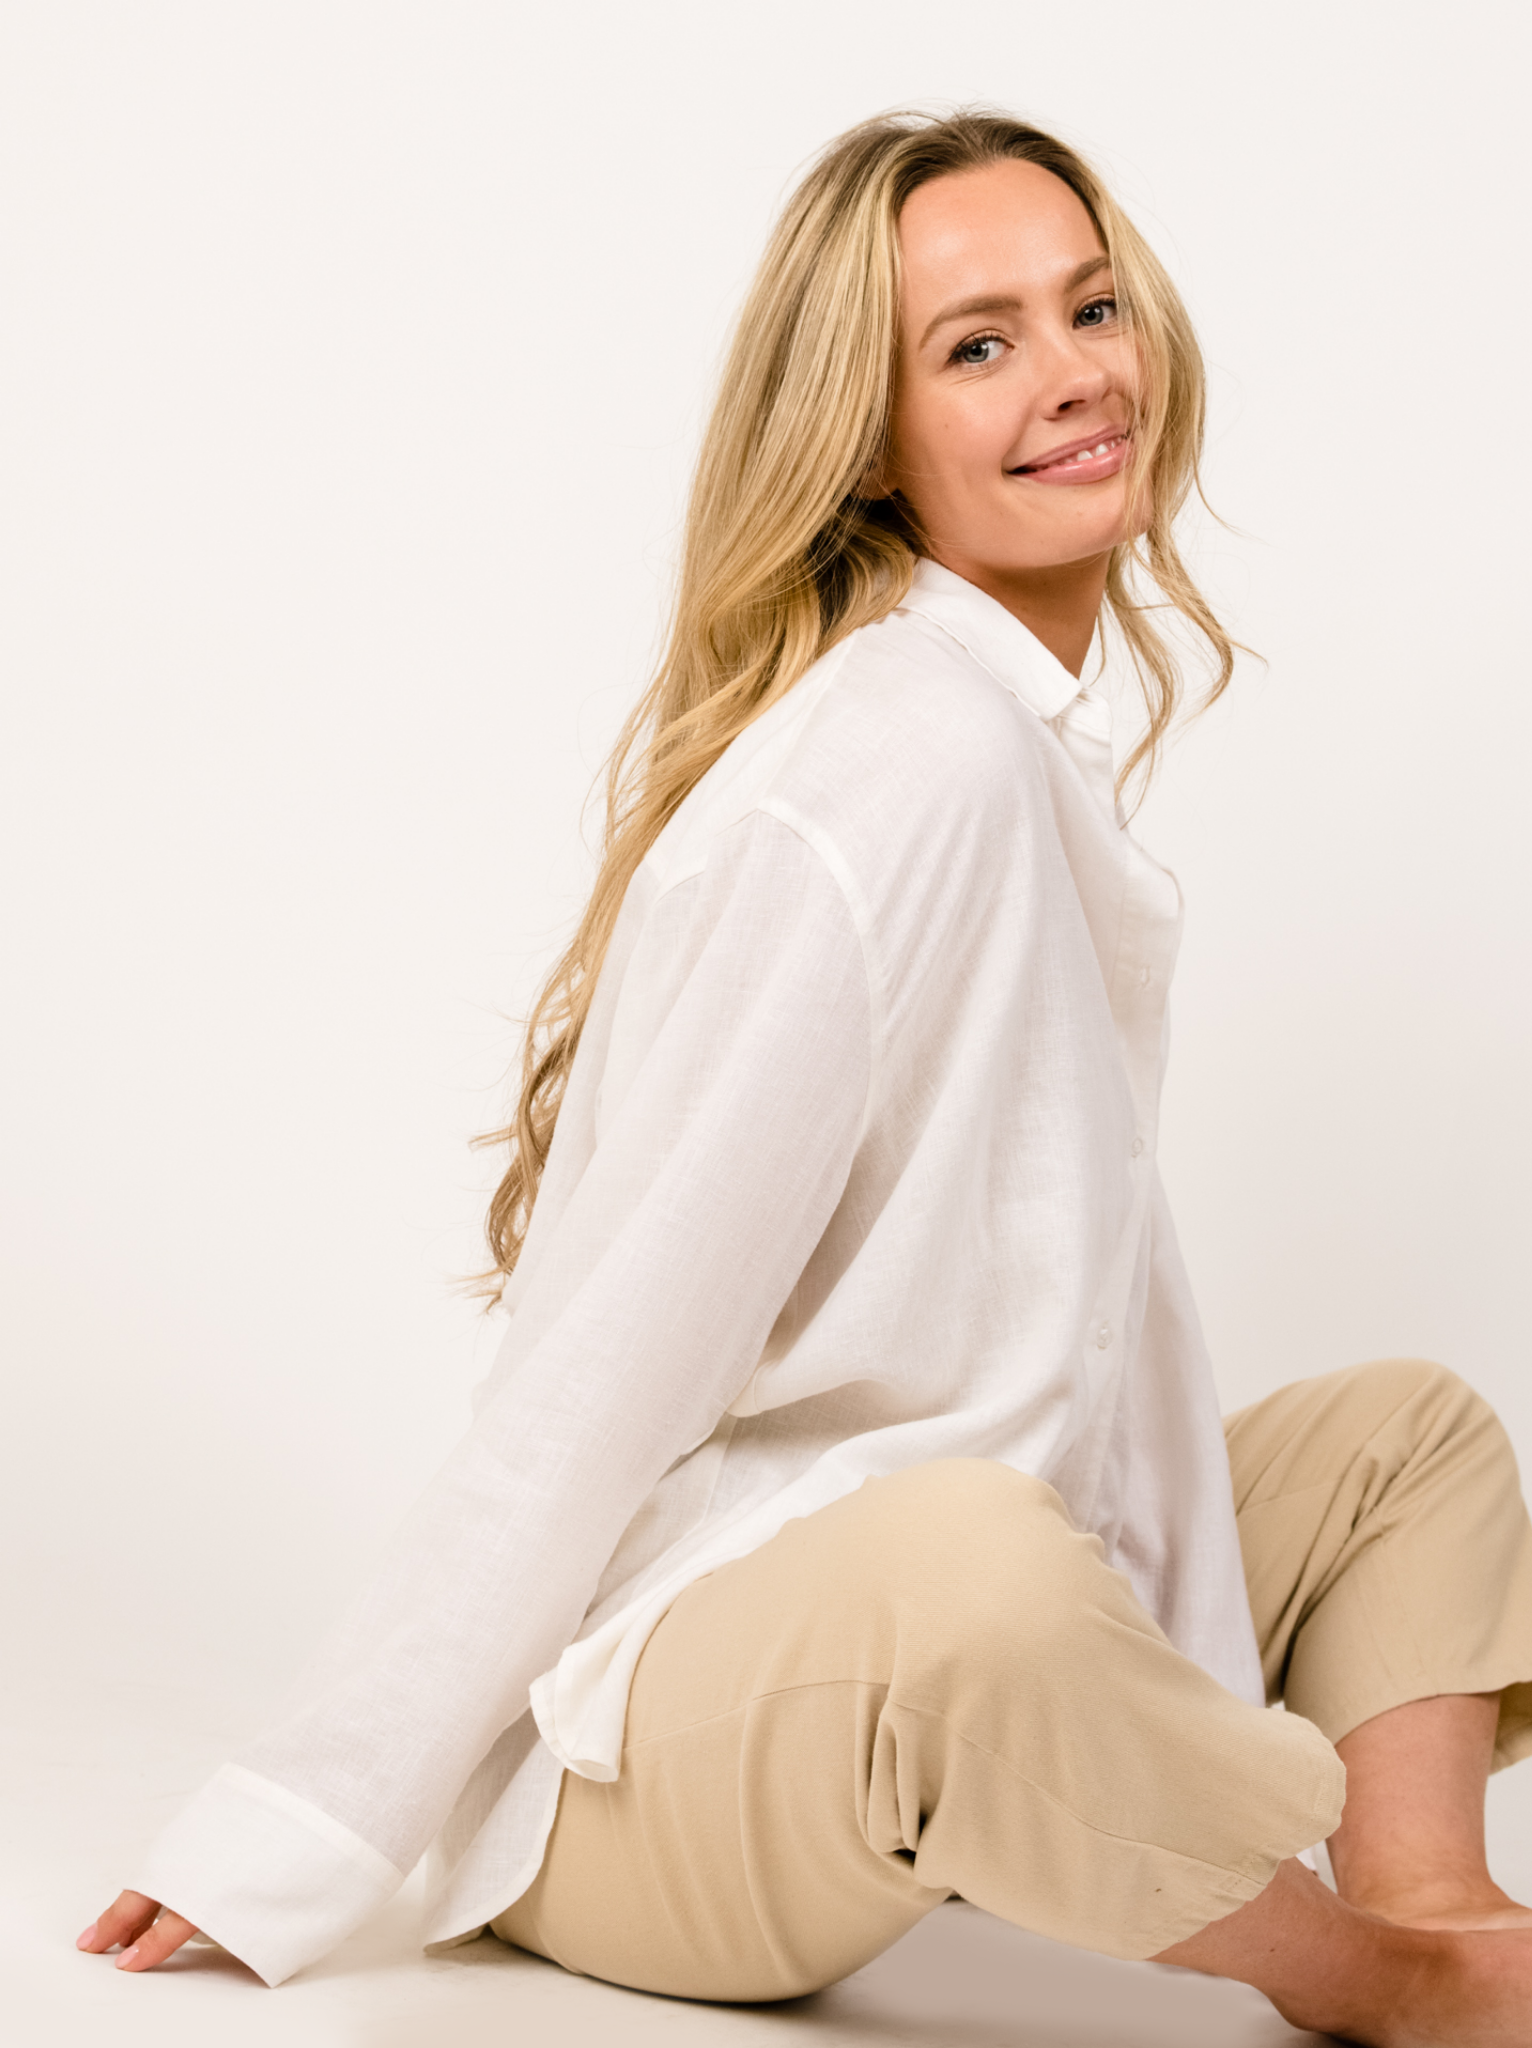 Woman in white shirt and beige pants sitting against a white background.